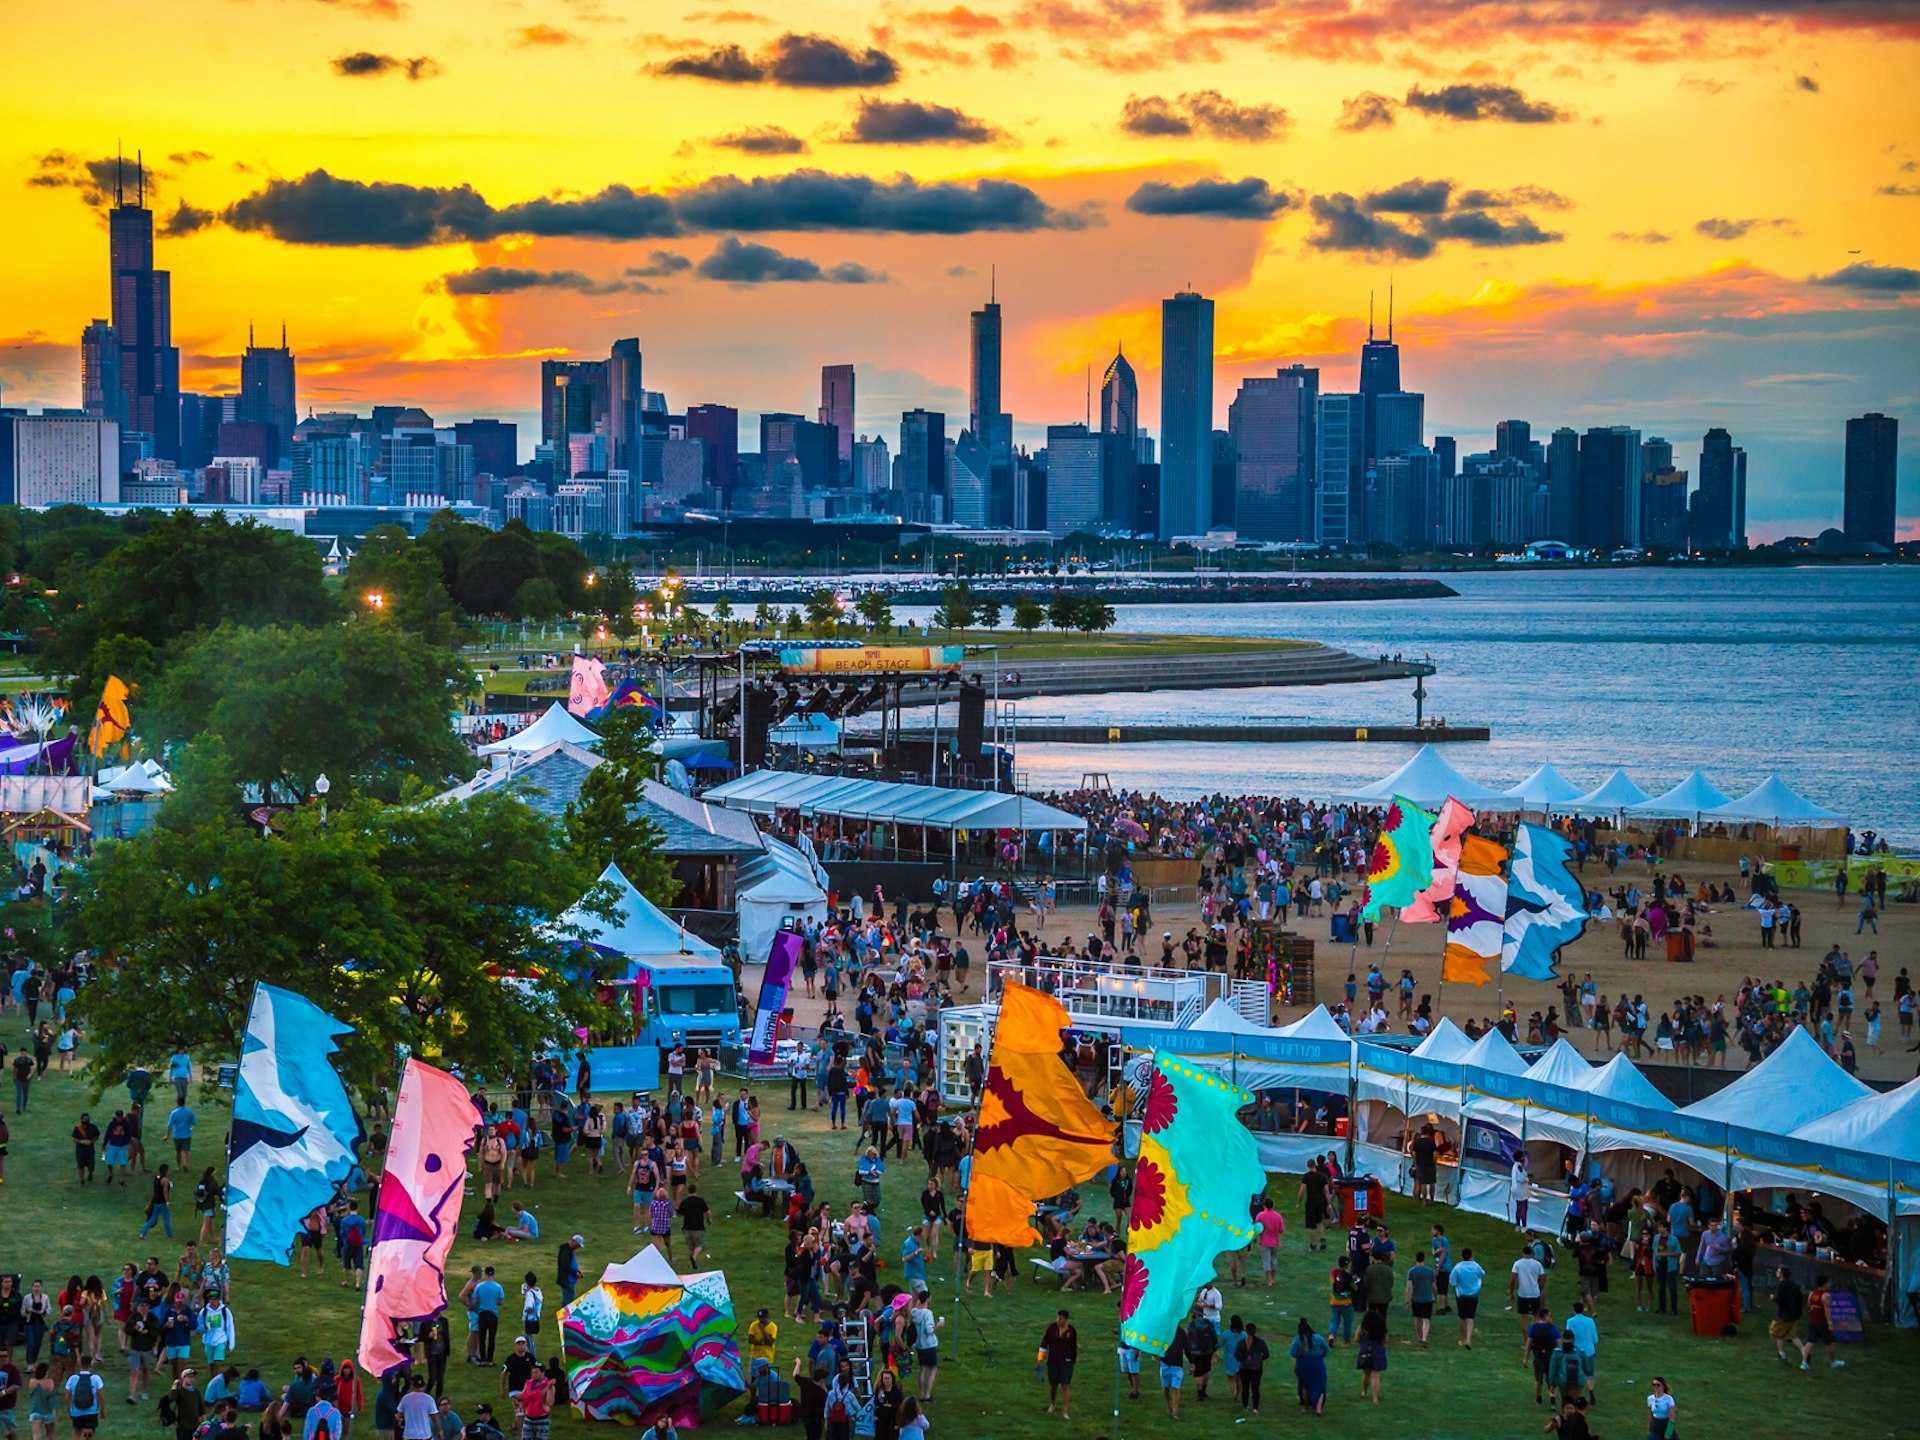 Alternative festivals - Mamby festival on the beach, at dusk with the city skyline in the background. Colourful vertical flags fly around the festival grounds, alongside large white marquees. The background is lit by a vivid yellow and orange sunset behind sparse clouds. 